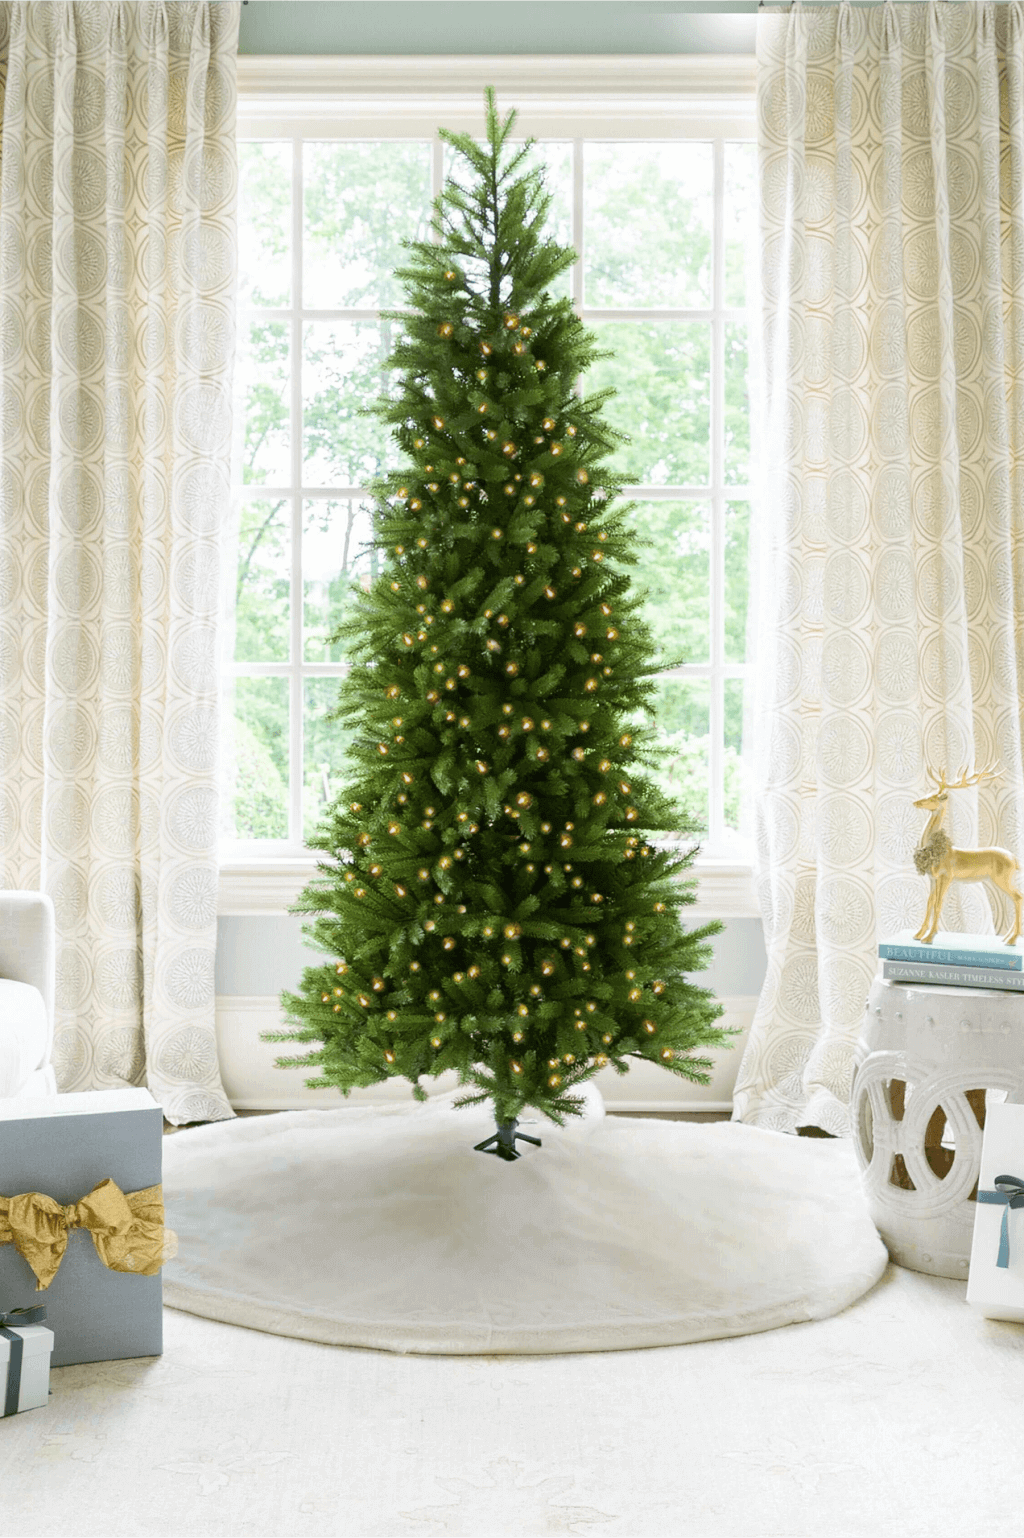 King of Christmas 10' King Fraser Fir Slim Quick-Shape Artificial Christmas Tree with 1100 Dual Color Warm White & Multi-Color LED Lights